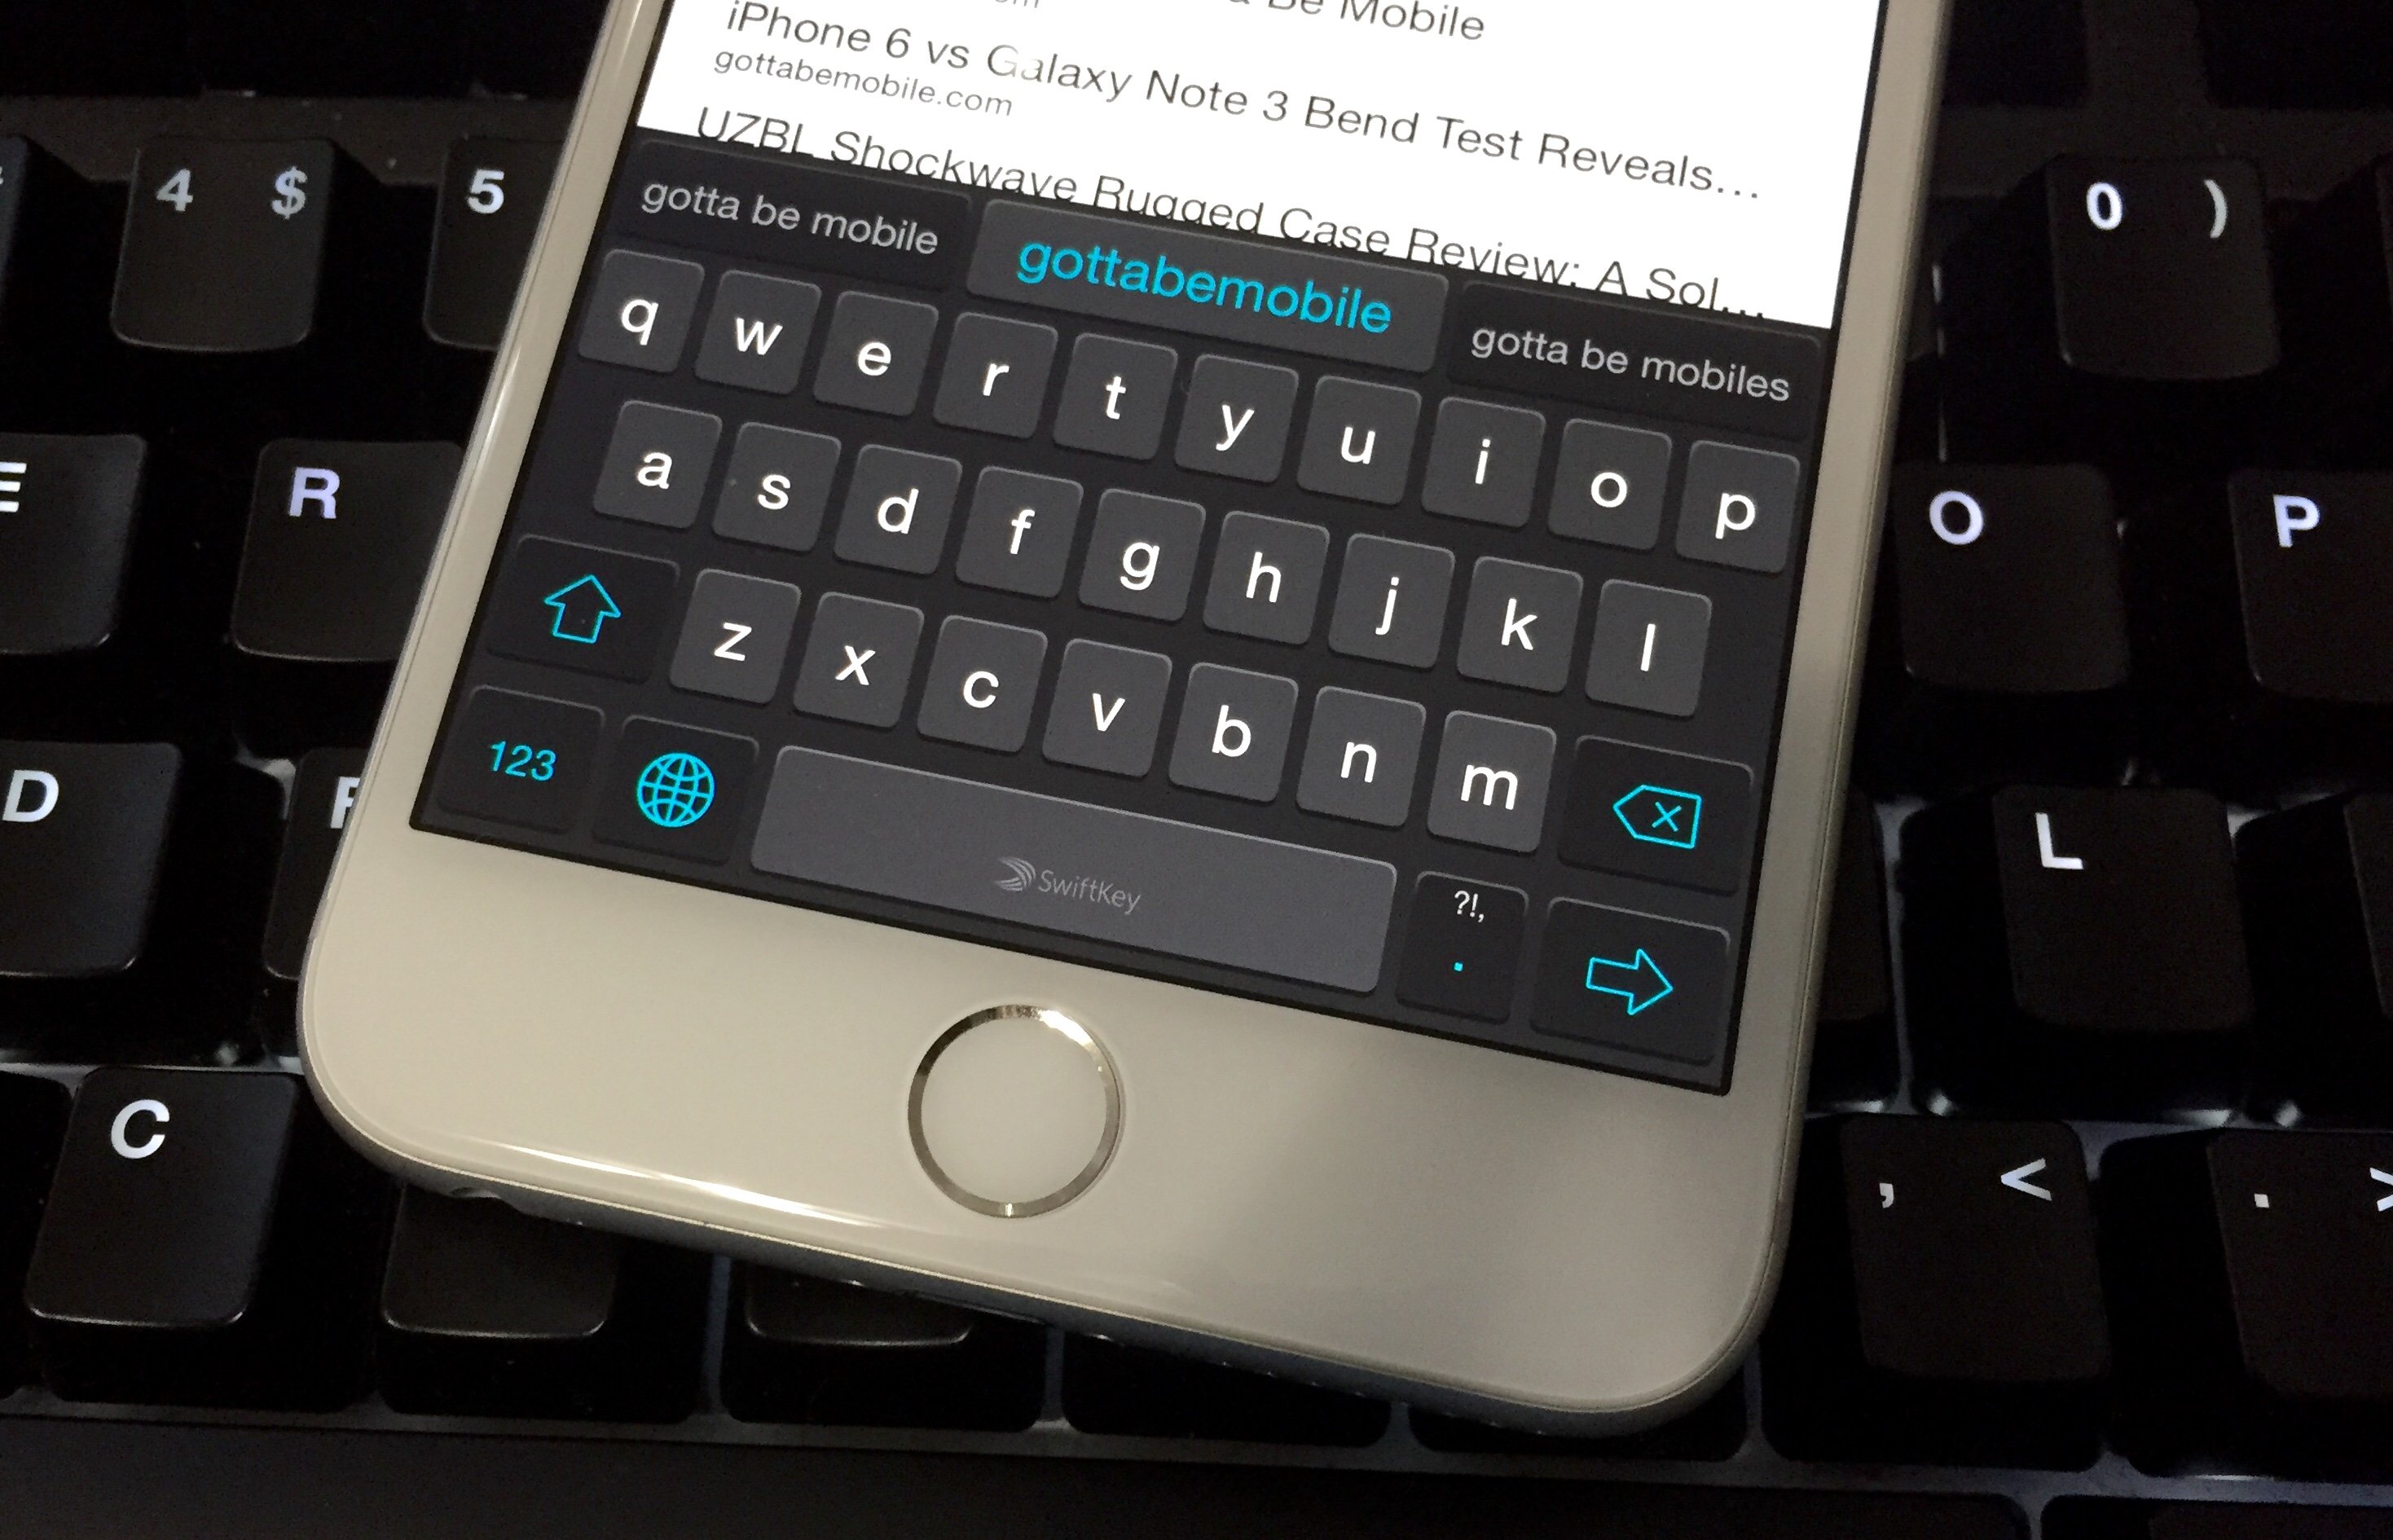 Here are the best iOS 8 keyboards you can download so far.